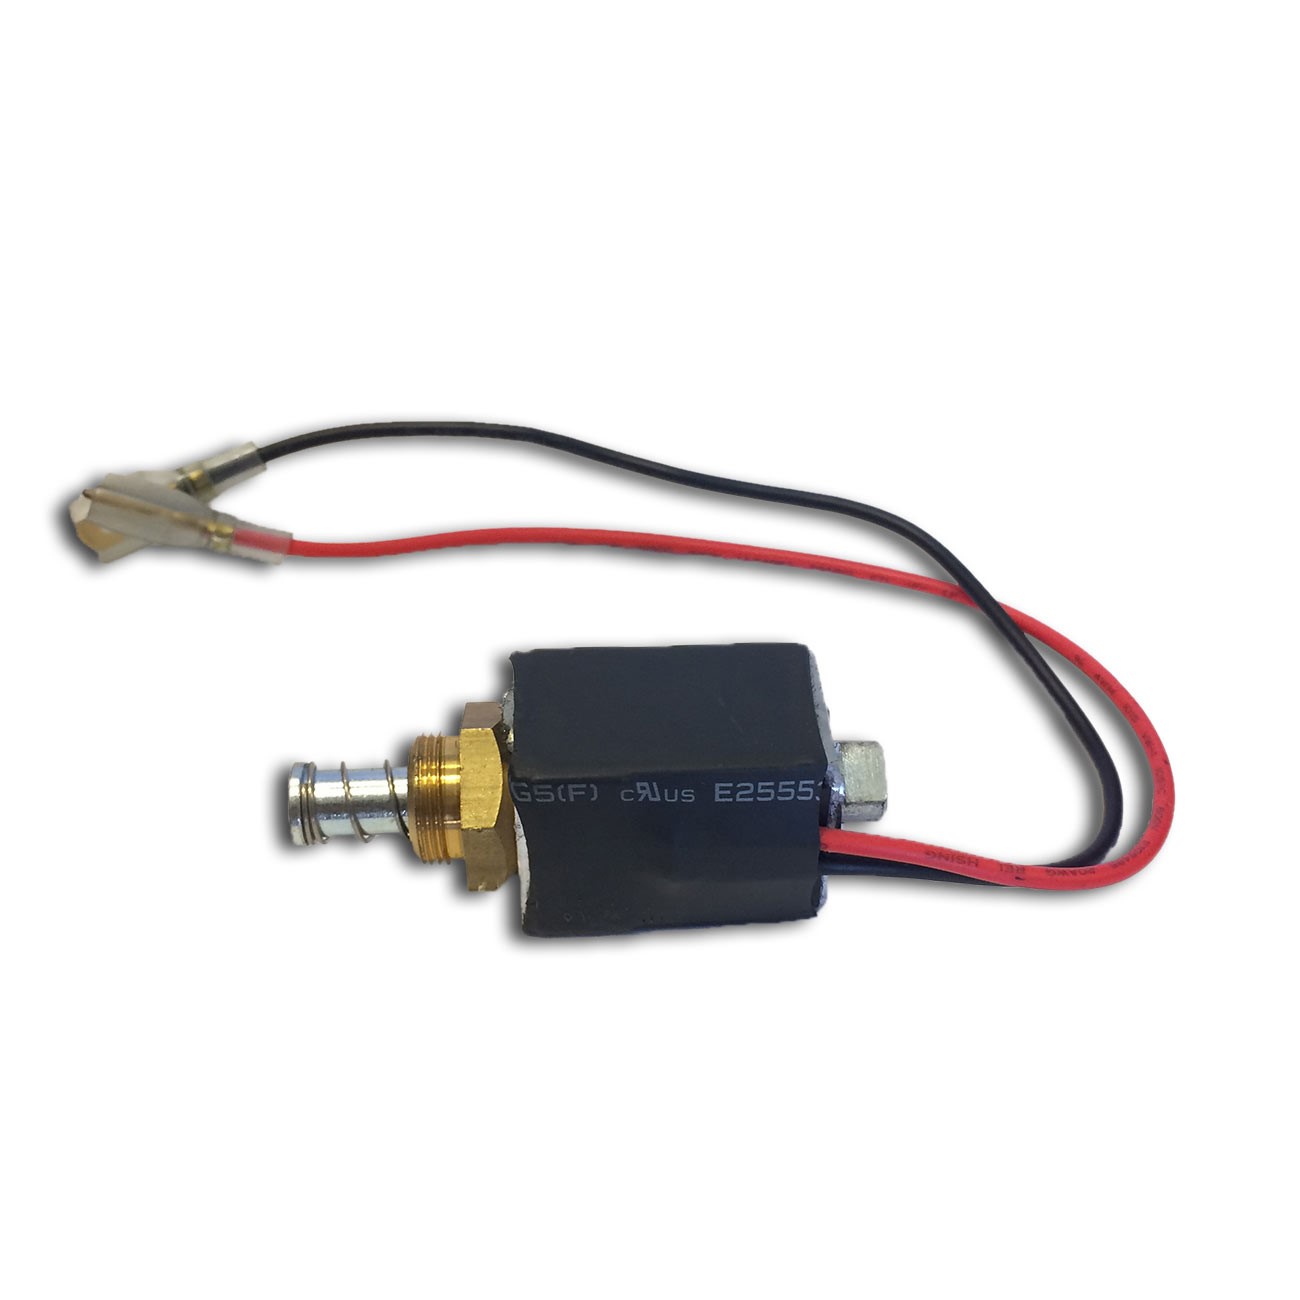 Gas Fireplace Remote Control Instructions Unique solenoid for Remote Controlled Fireplaces 32rt Series